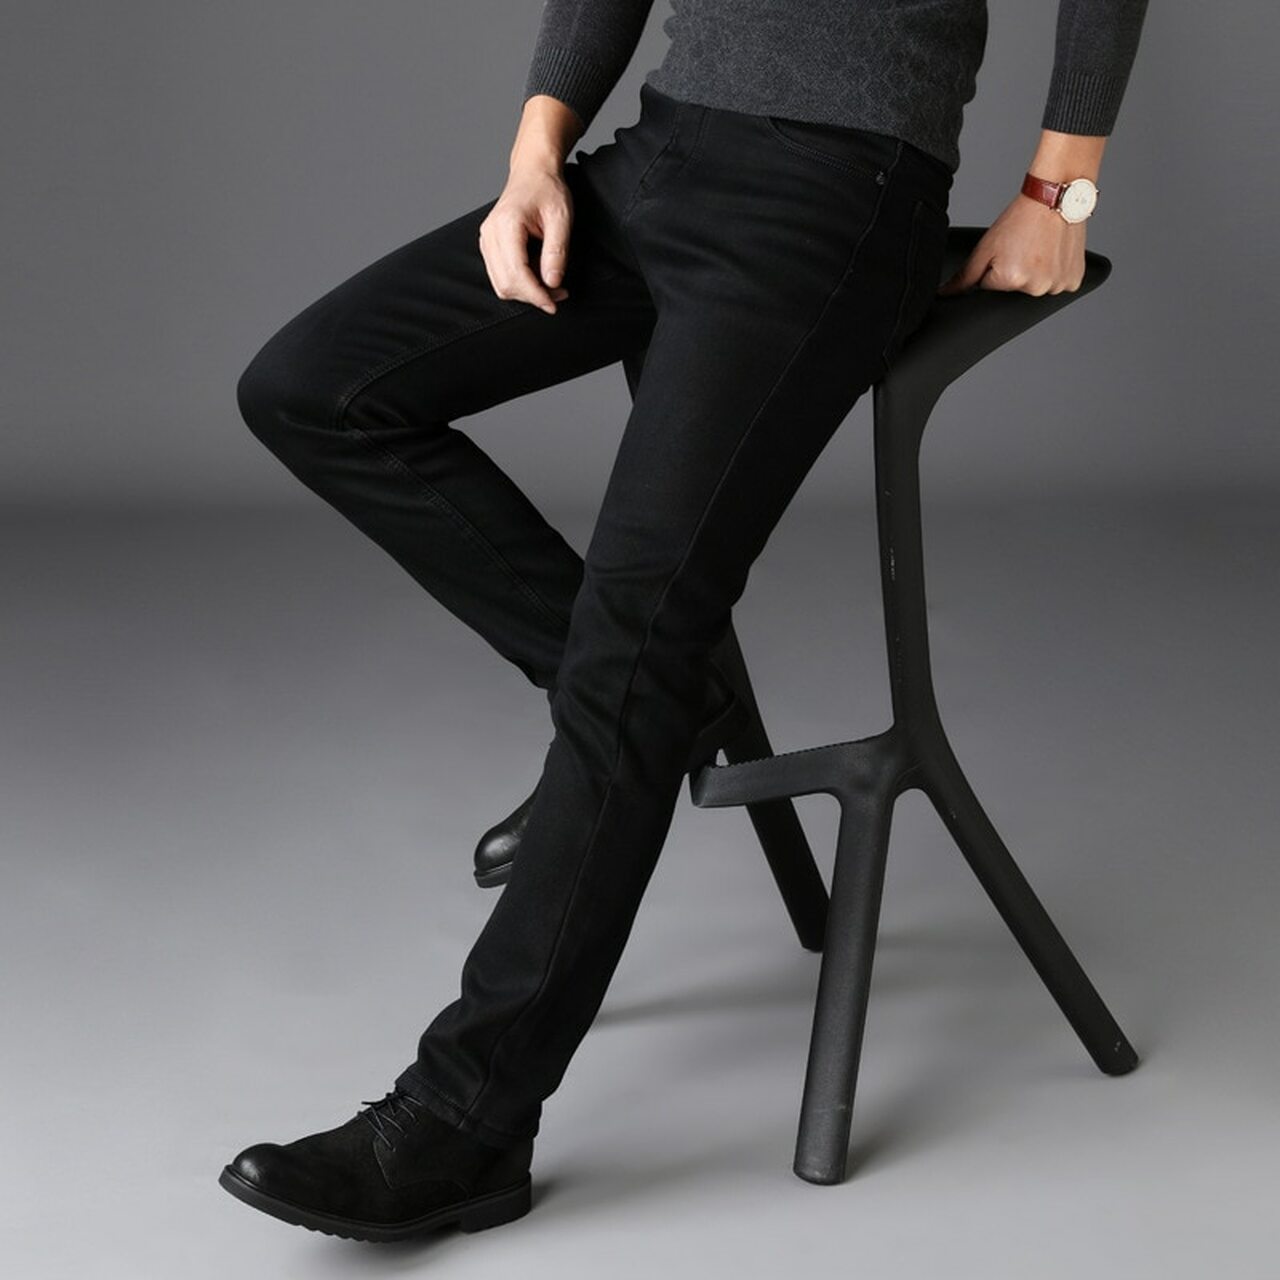 Why to consider Mens Cargo Pants?